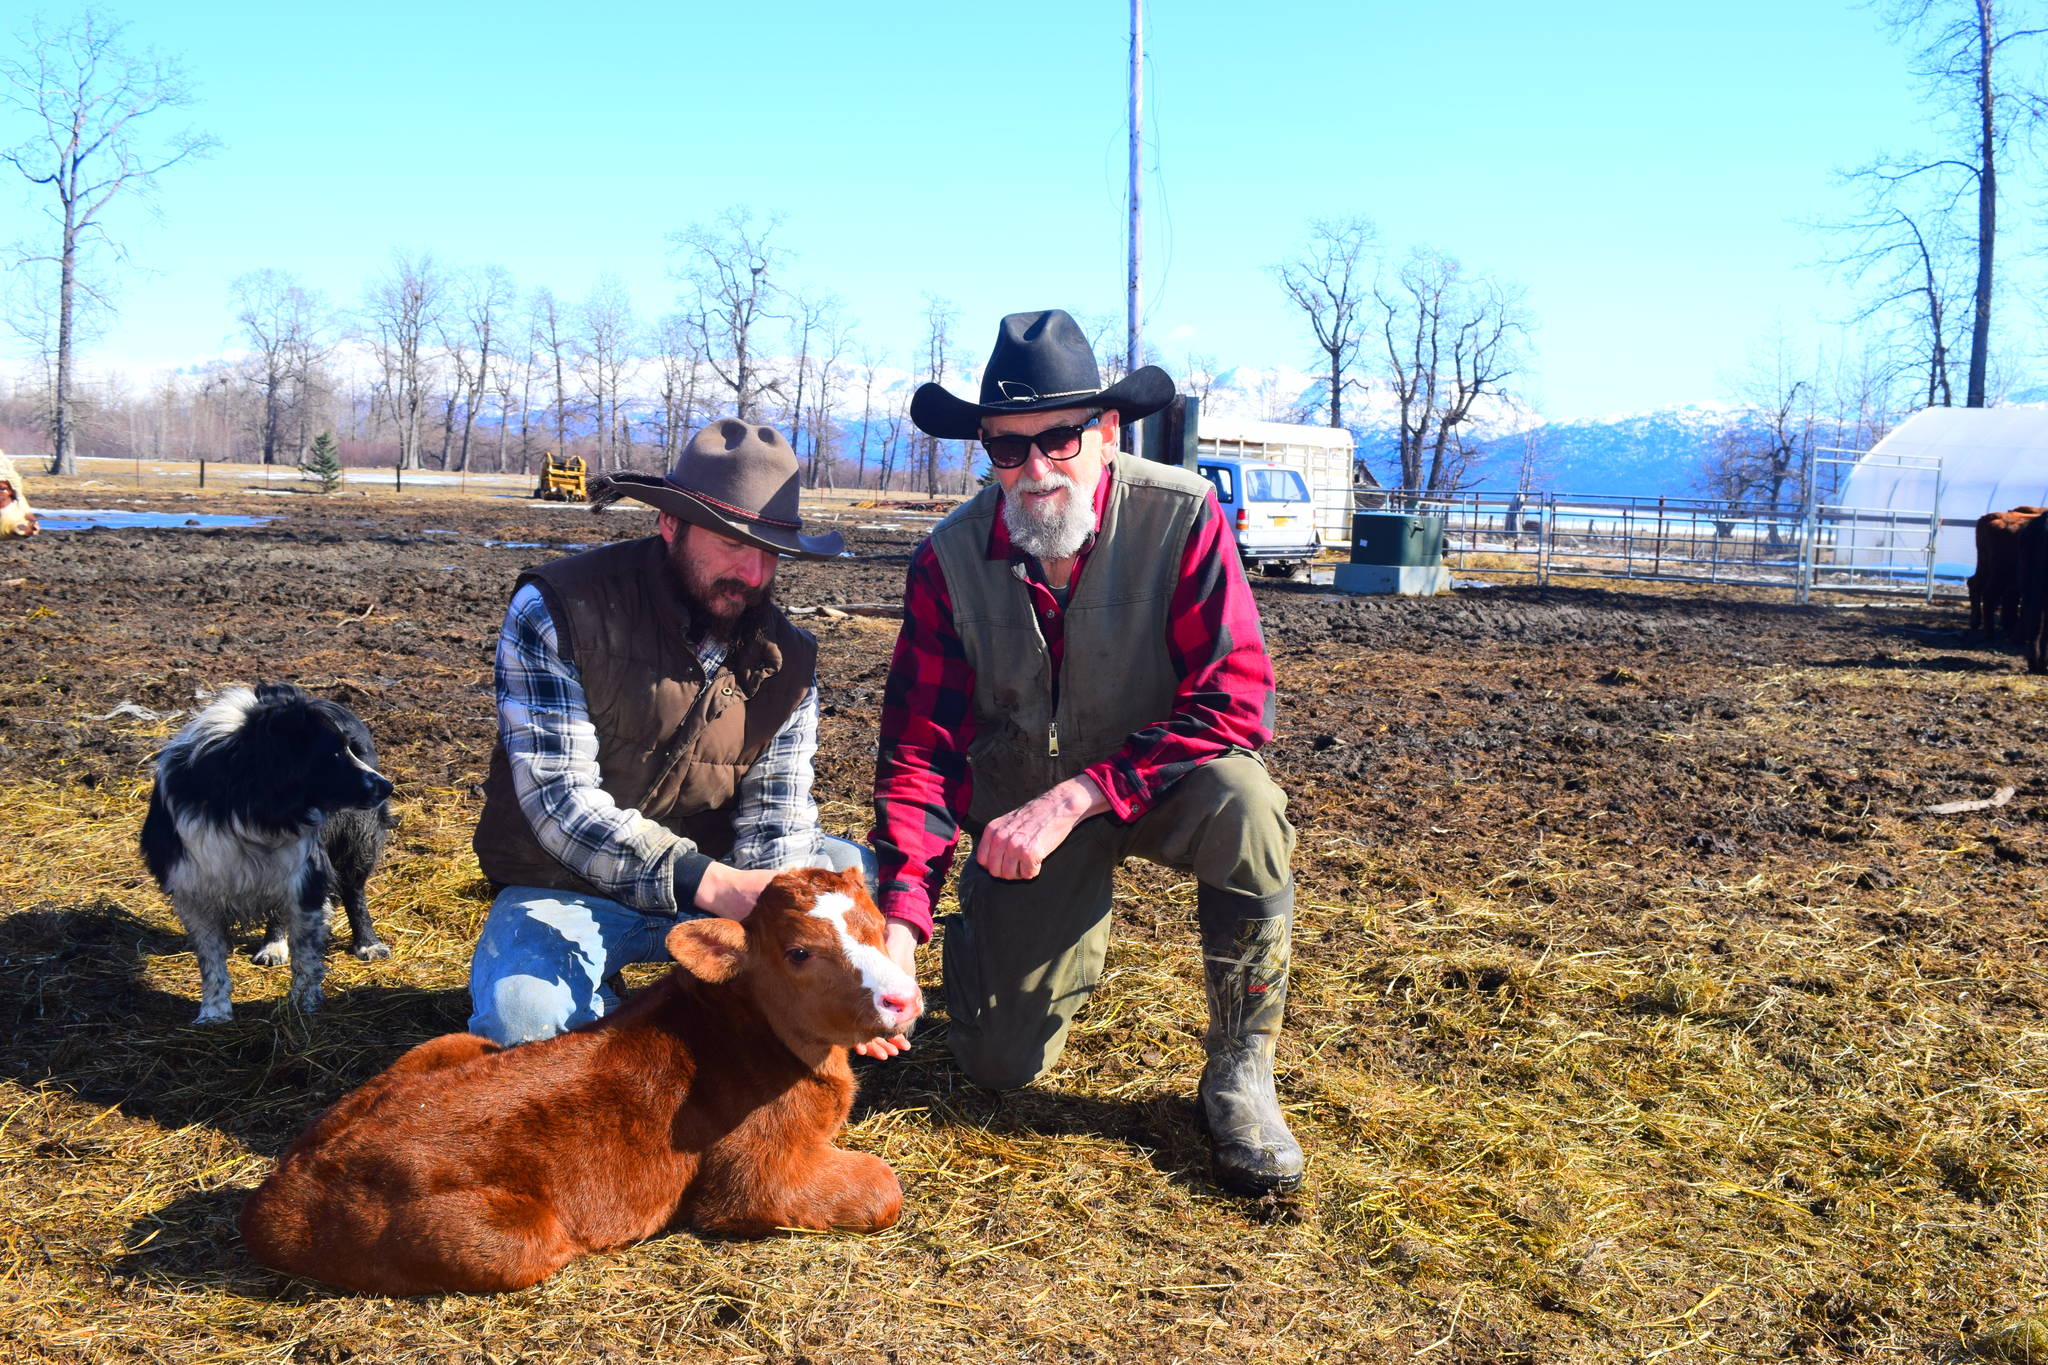 Alaskan cowboys bring local beef to the table